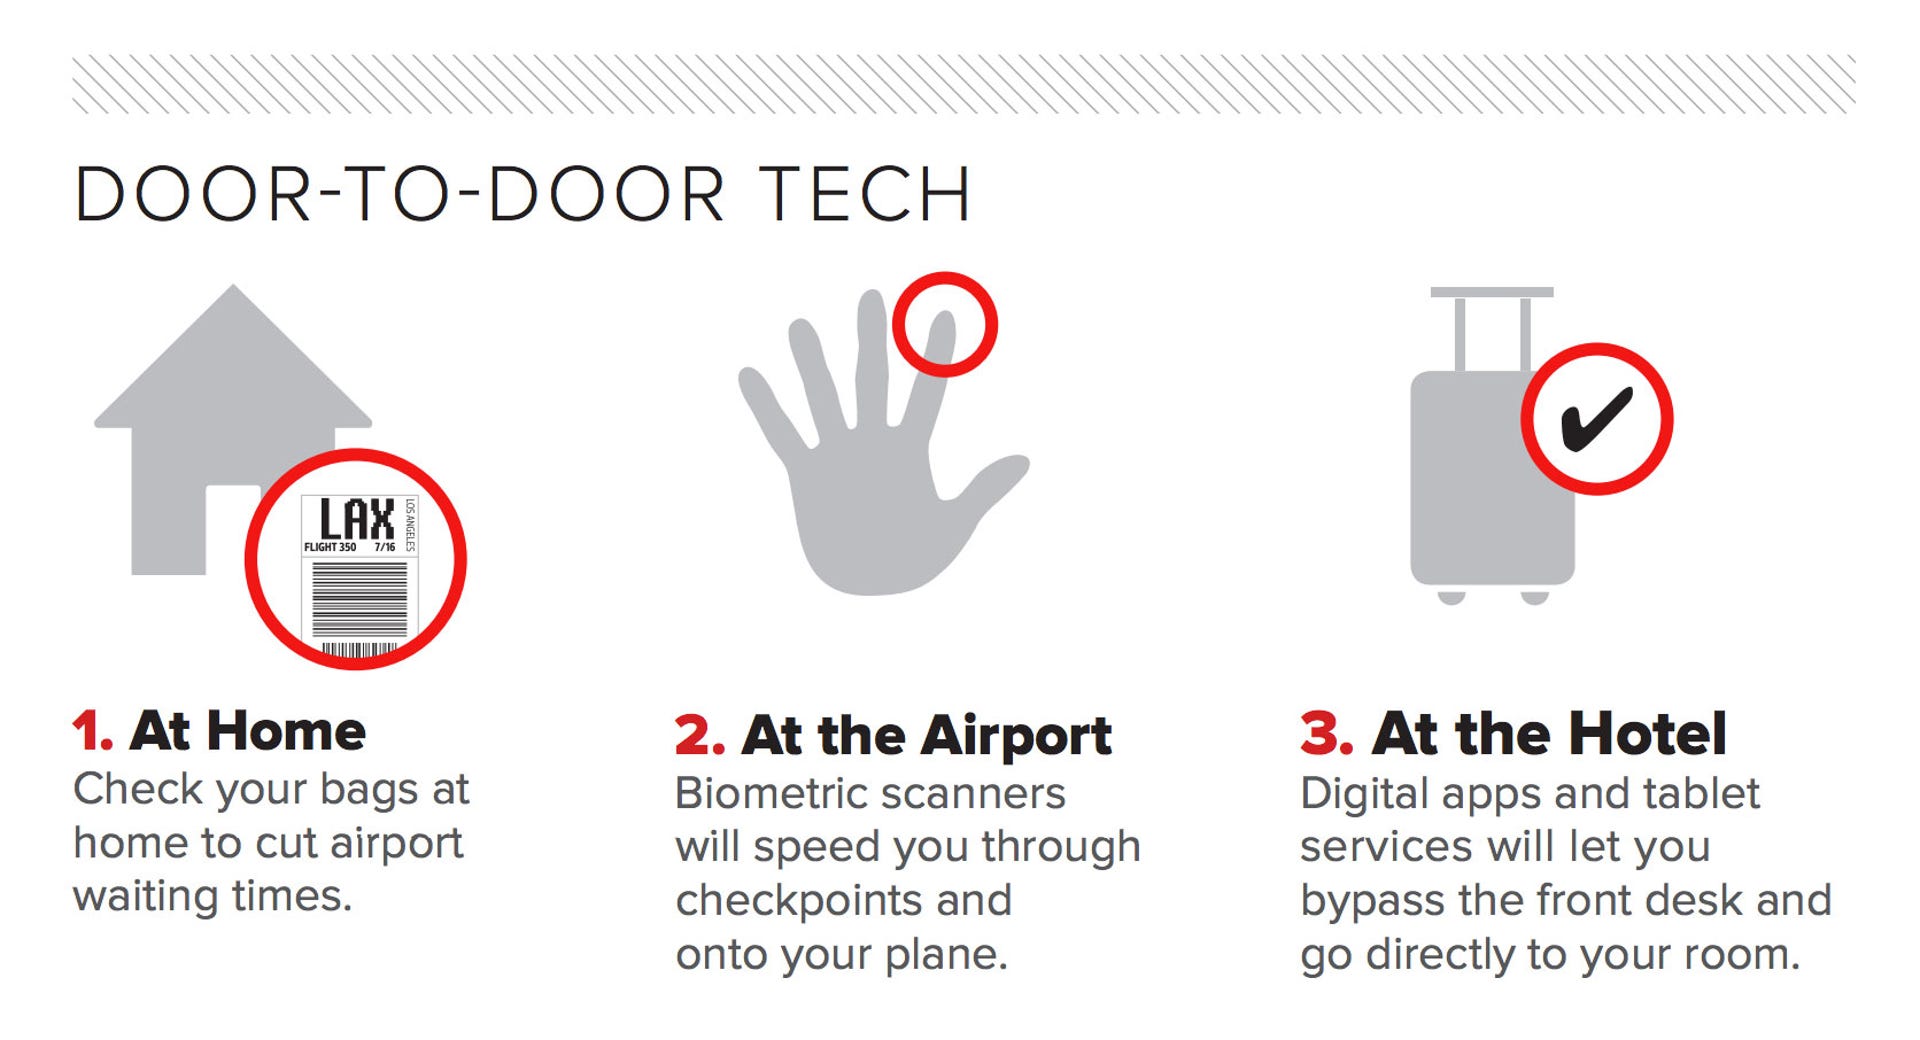 Technology is changing tedious parts of travel.